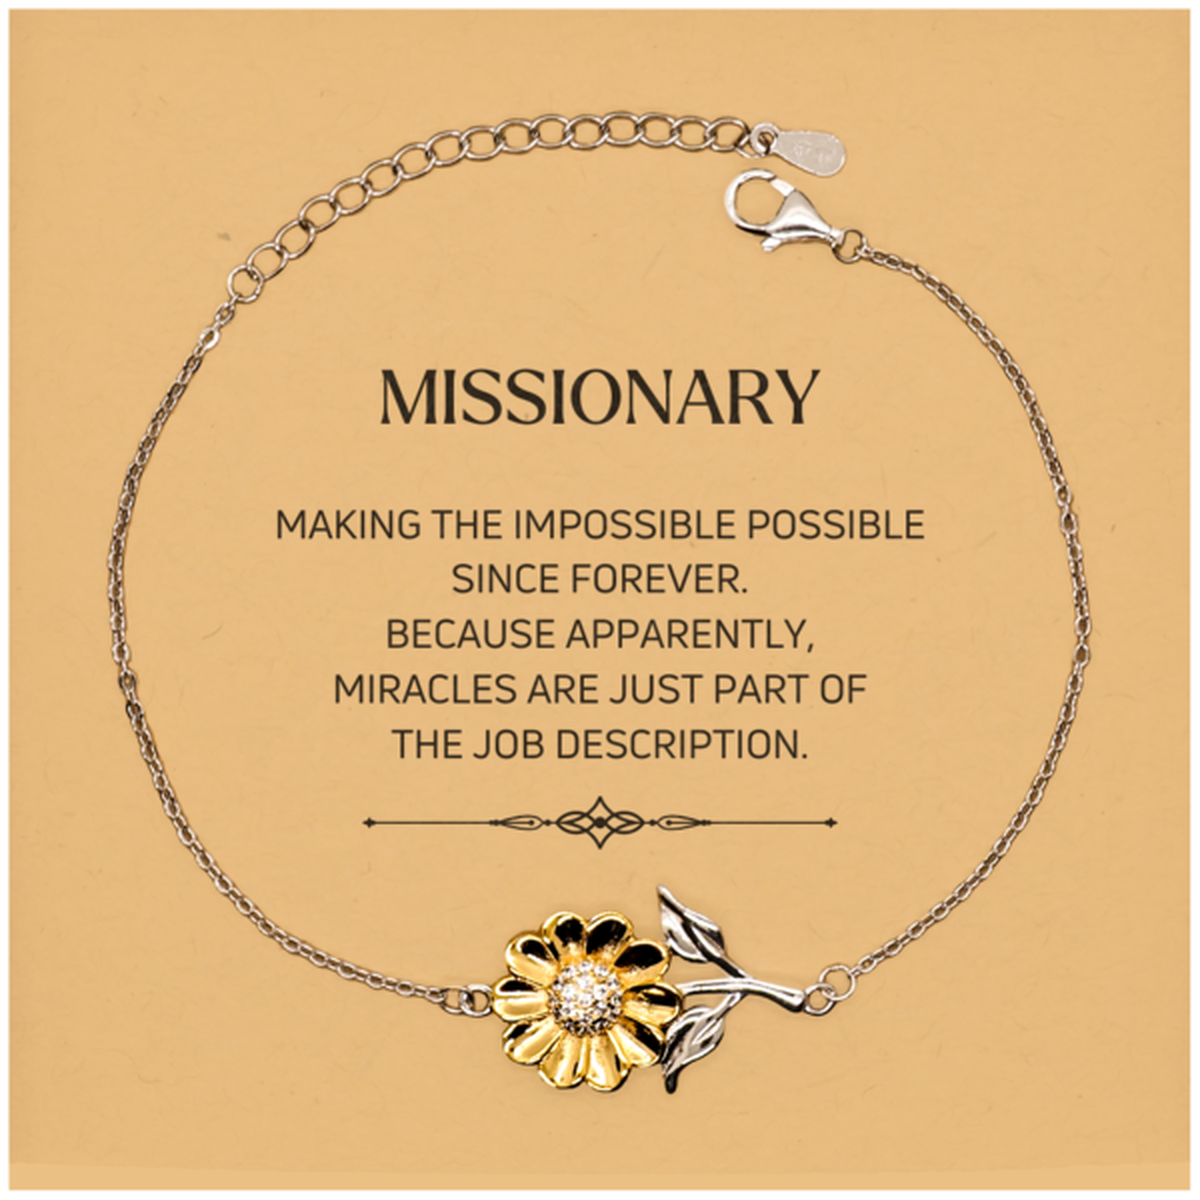 Funny Missionary Gifts, Miracles are just part of the job description, Inspirational Birthday Christmas Sunflower Bracelet For Missionary, Men, Women, Coworkers, Friends, Boss